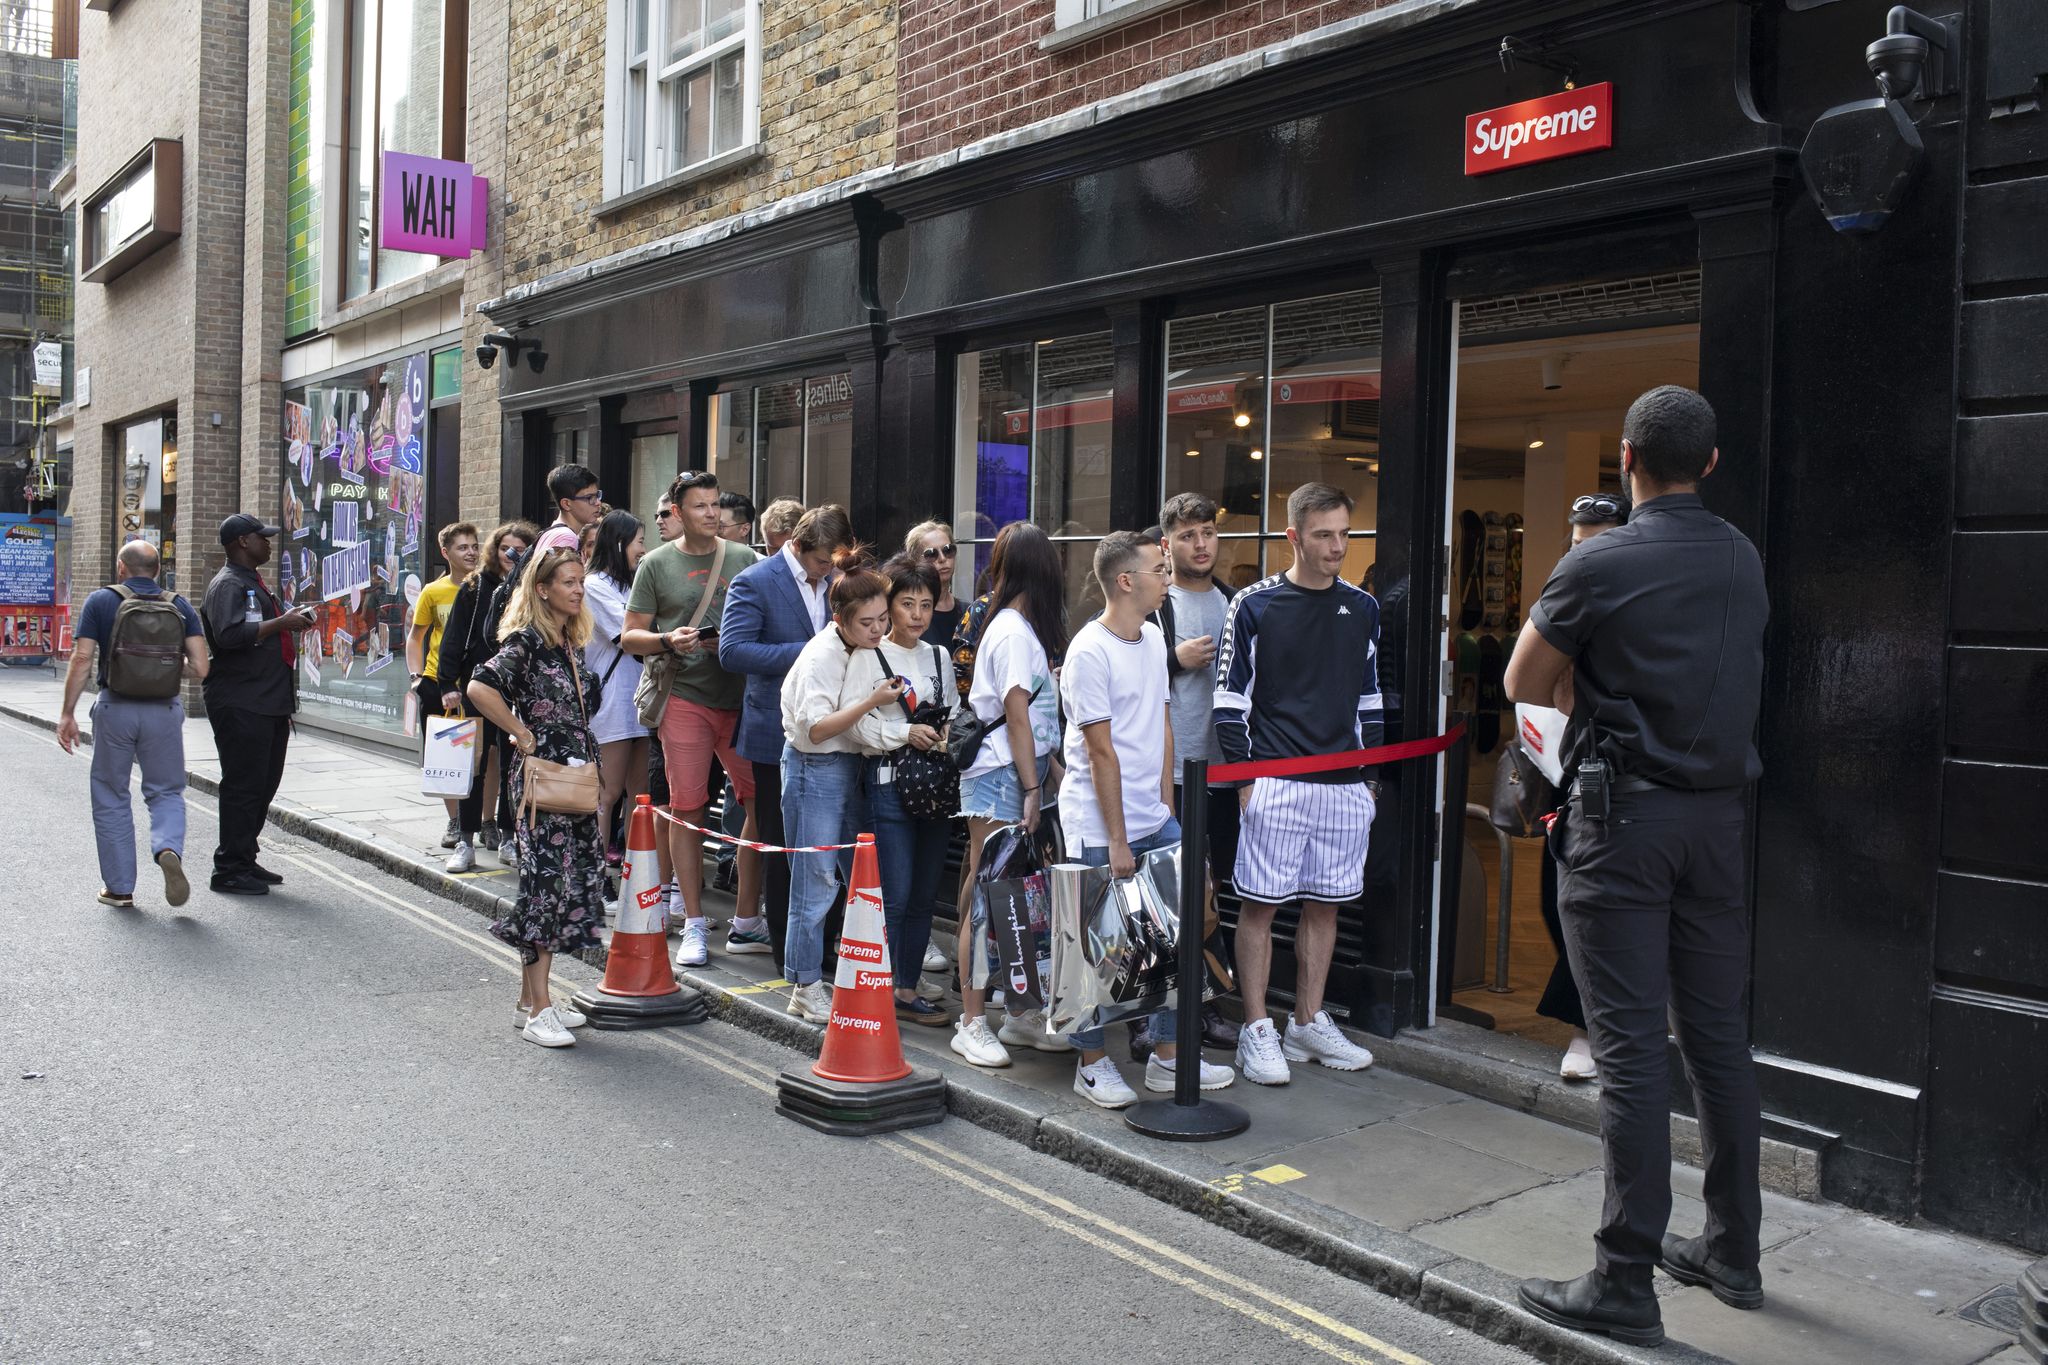 every thursday the fashion label supreme, which is a skateboarding shop  clothing brand releases new lines and so fans of the brand queue outside this shop in soho to be first in line for some original fashions in london, england, united kingdom photo by mike kempin pictures via getty images